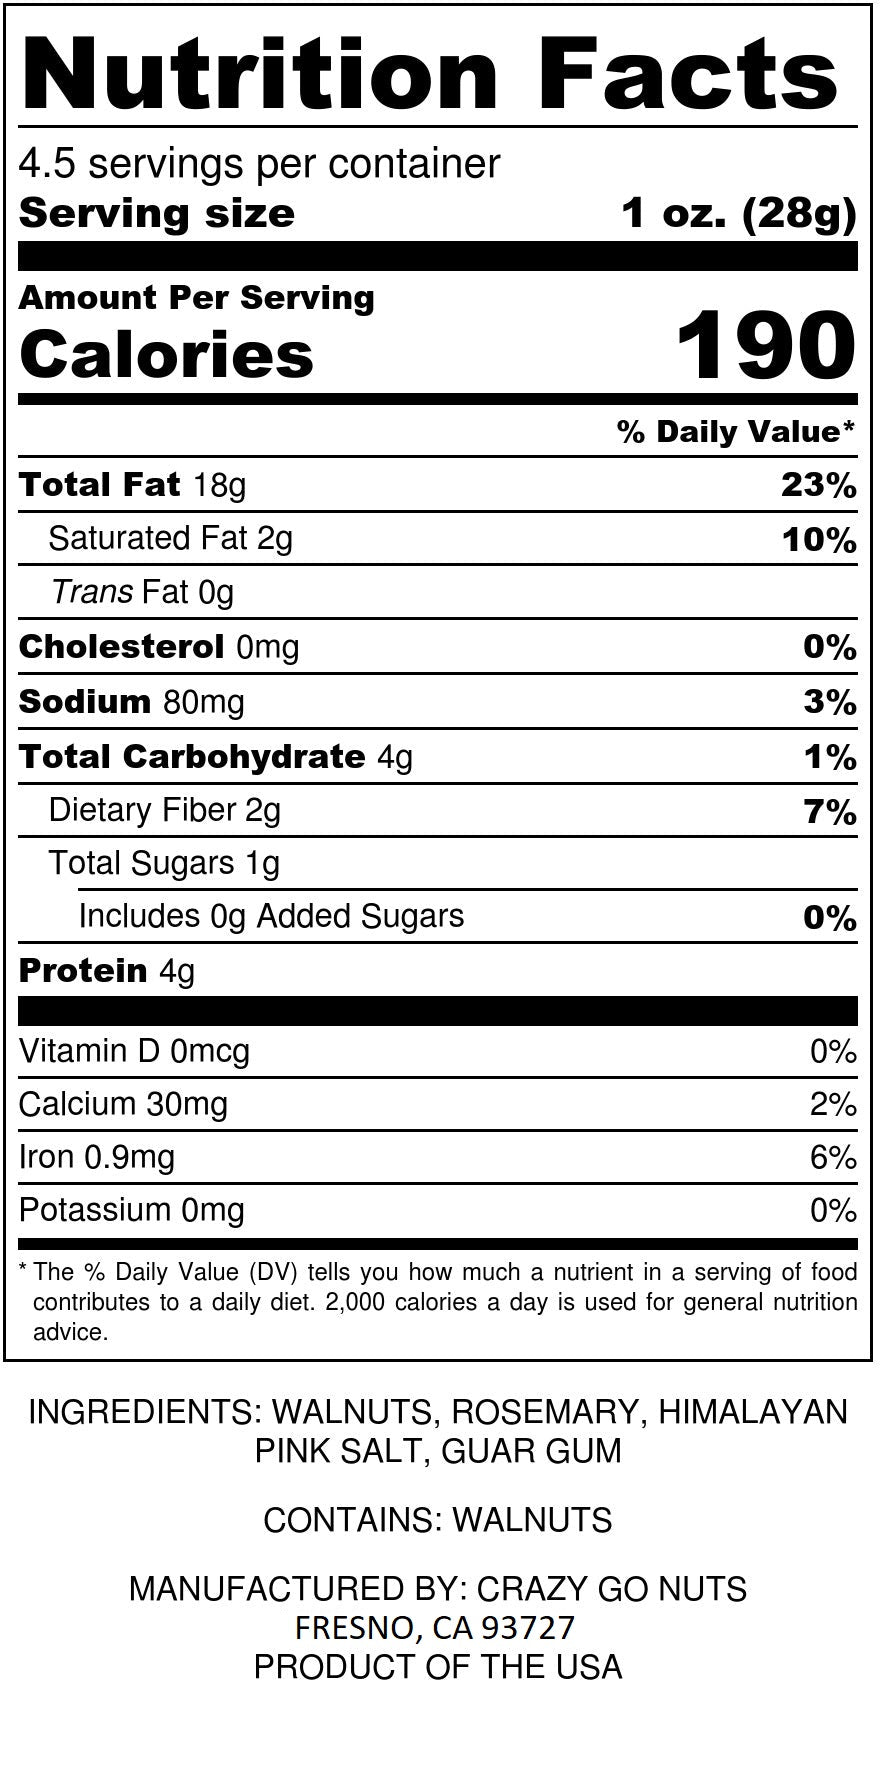 Nutrition panel for rosemary pink salt walnut snacks. Ingredients include walnuts, rosemary, pink salt, and guar gum